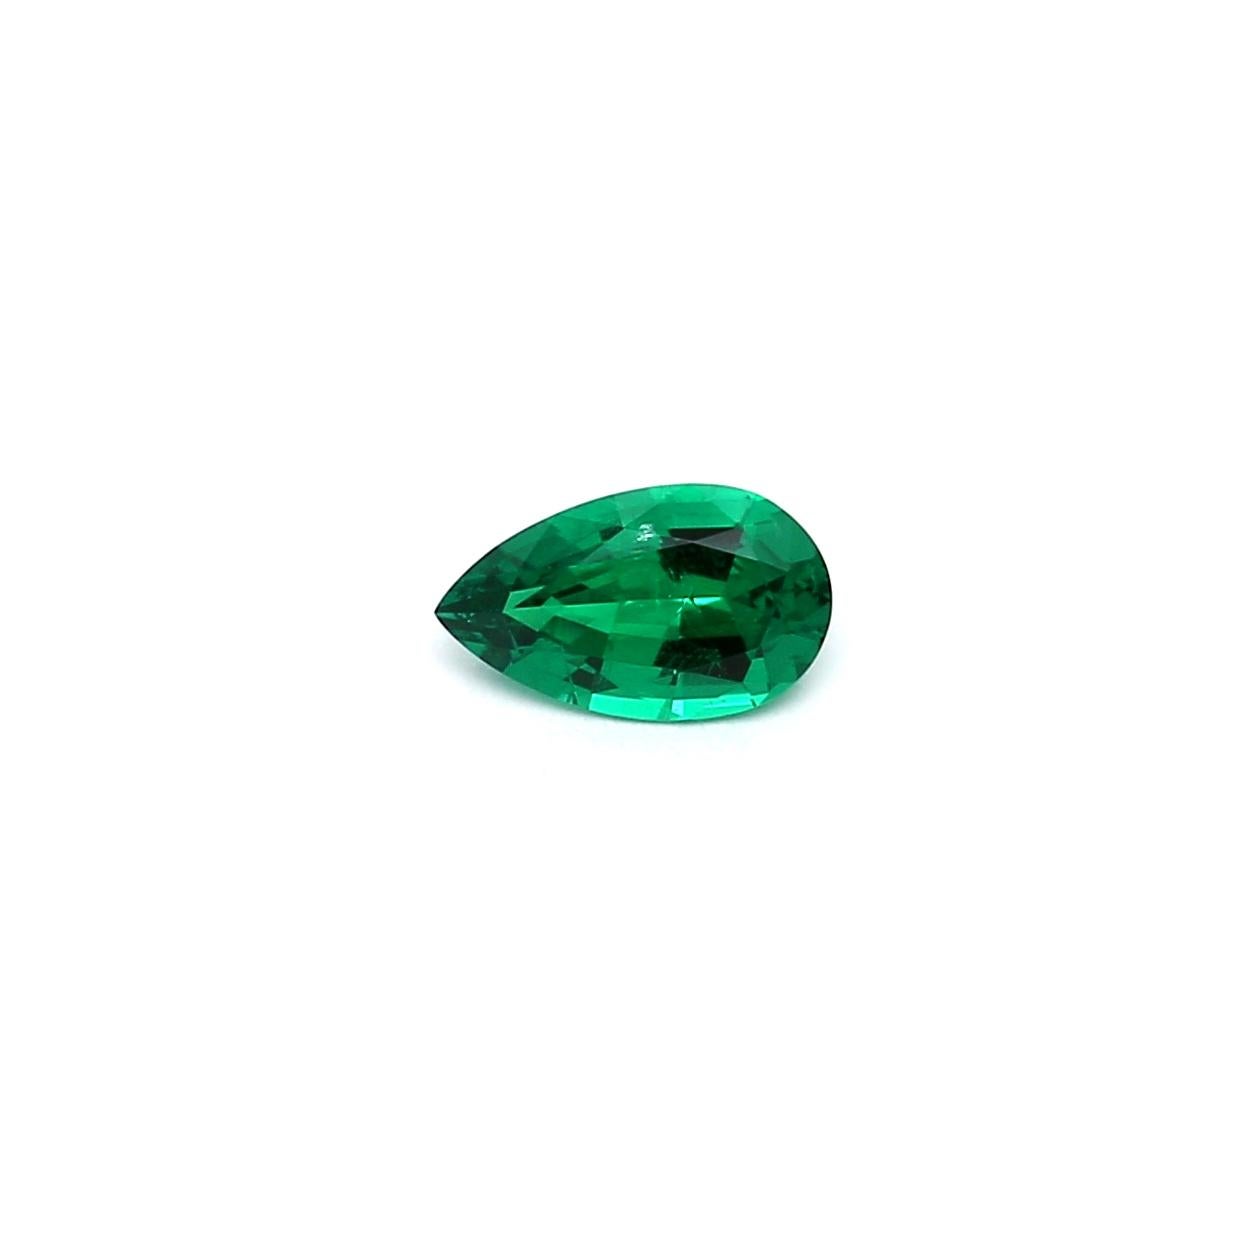 An amazing Russian Emerald which allows jewelers to create a unique piece of wearable art.
This exceptional quality gemstone would make a custom-made jewelry design. Perfect for a Ring or Pendant.

Shape - Pear
Weight - 0.39 ct
Treatment -